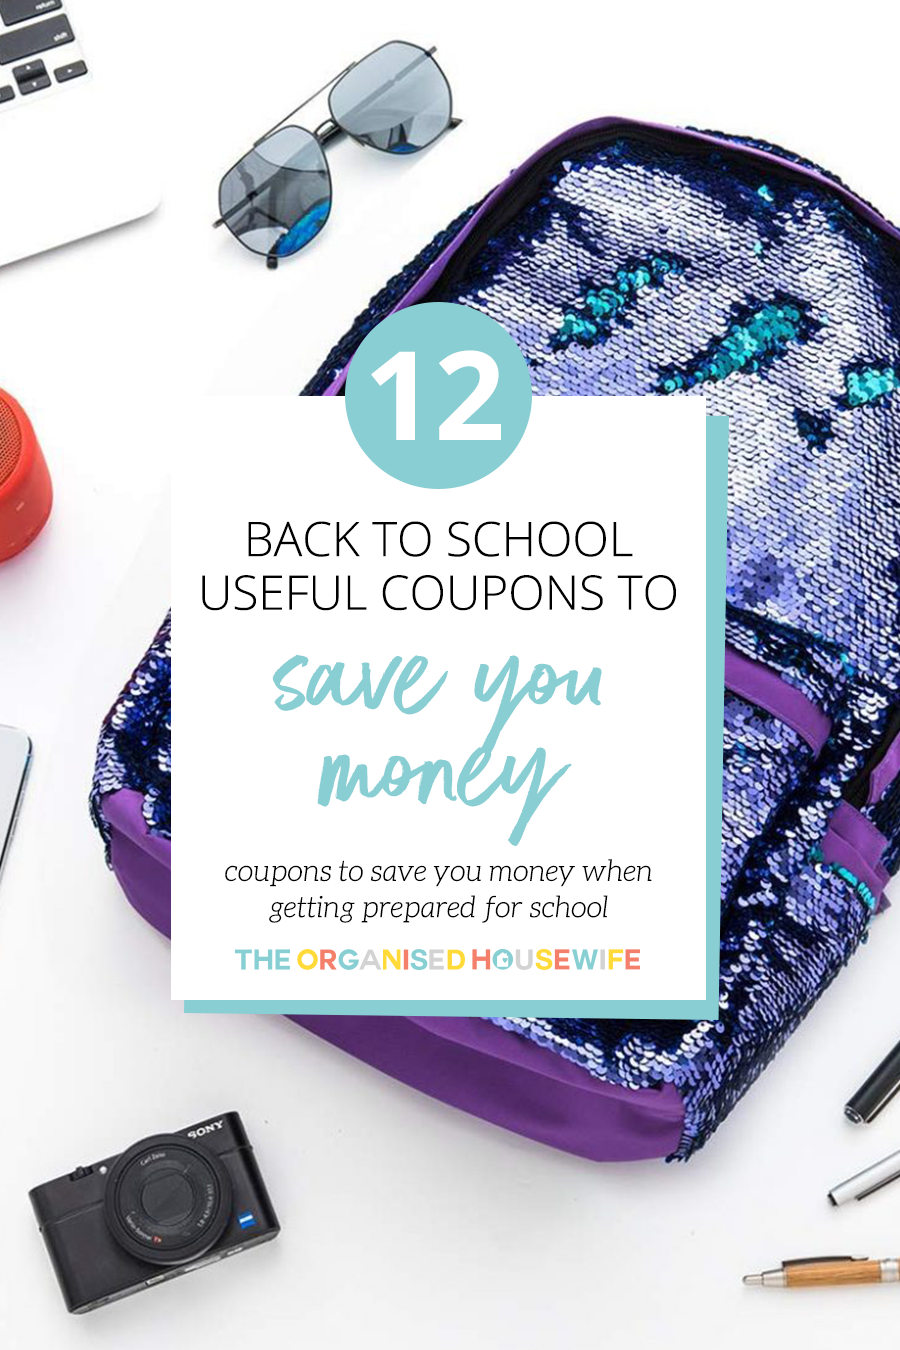 Back to School Top 12 Useful Coupons to Save You Money The